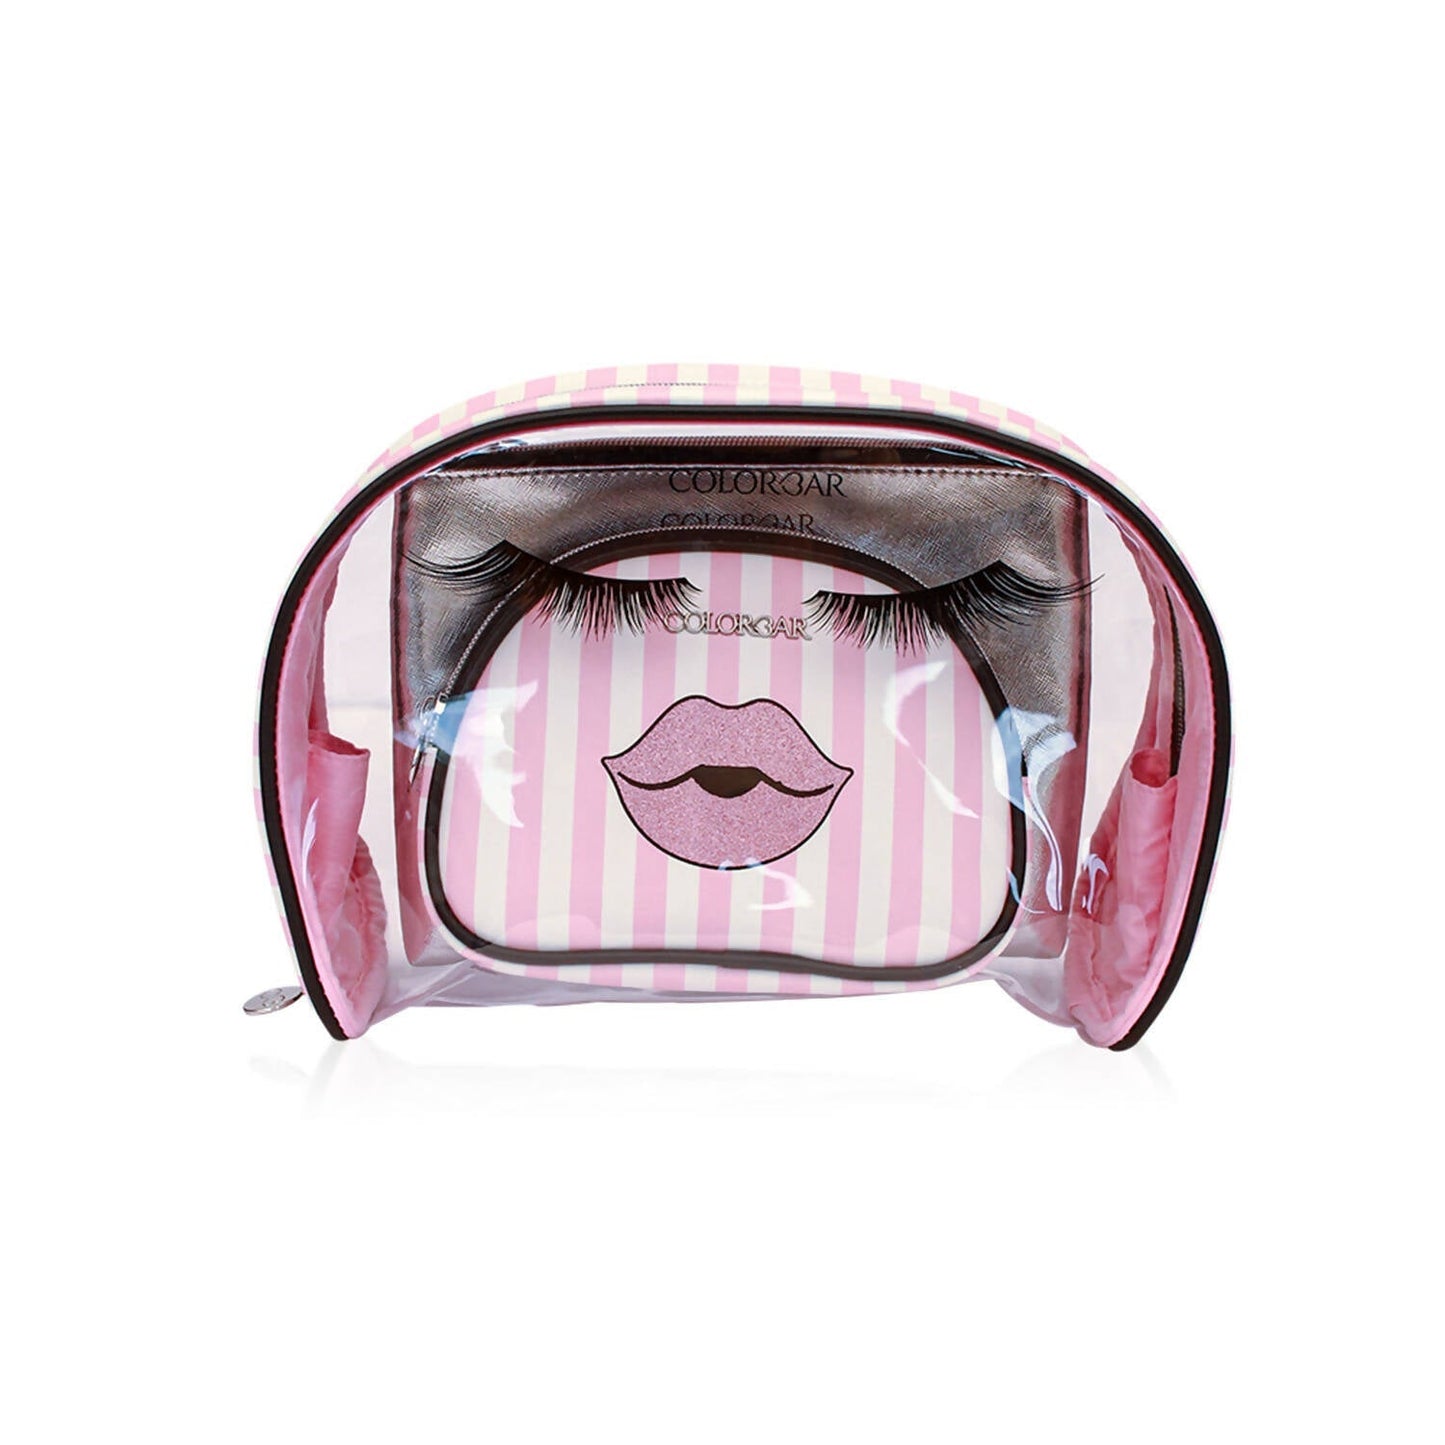 Colorbar Pouch Lips & Lashes Bag In Bag (Set Of Three) - White + Blush Pink